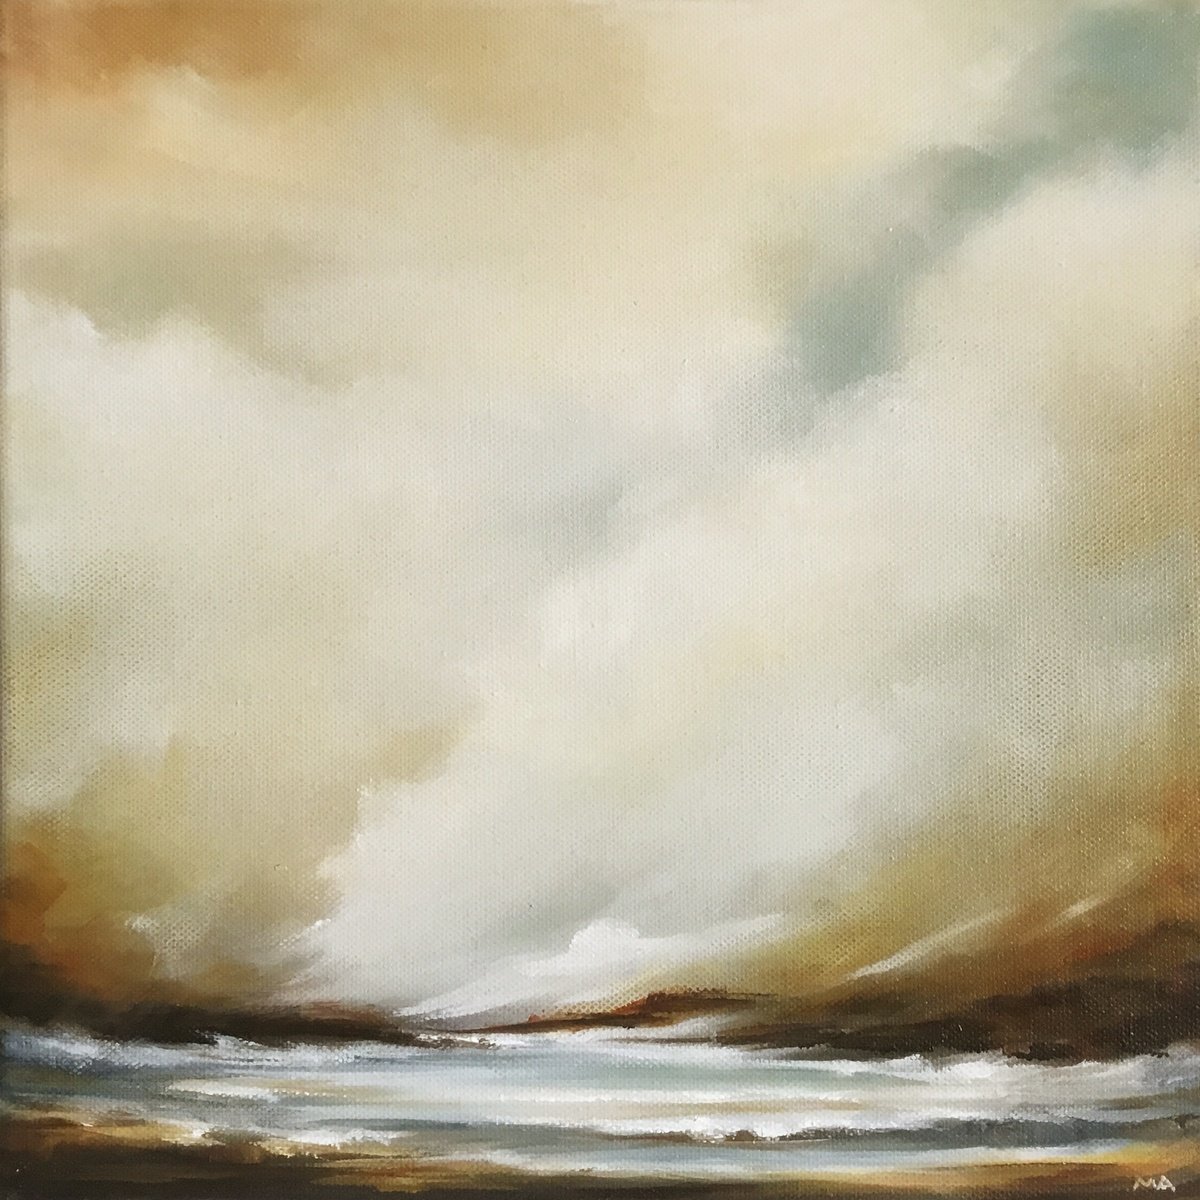 In The Storm We Find Ourselves - Original Seascape Oil Painting on Stretched Canvas by MULLO ART